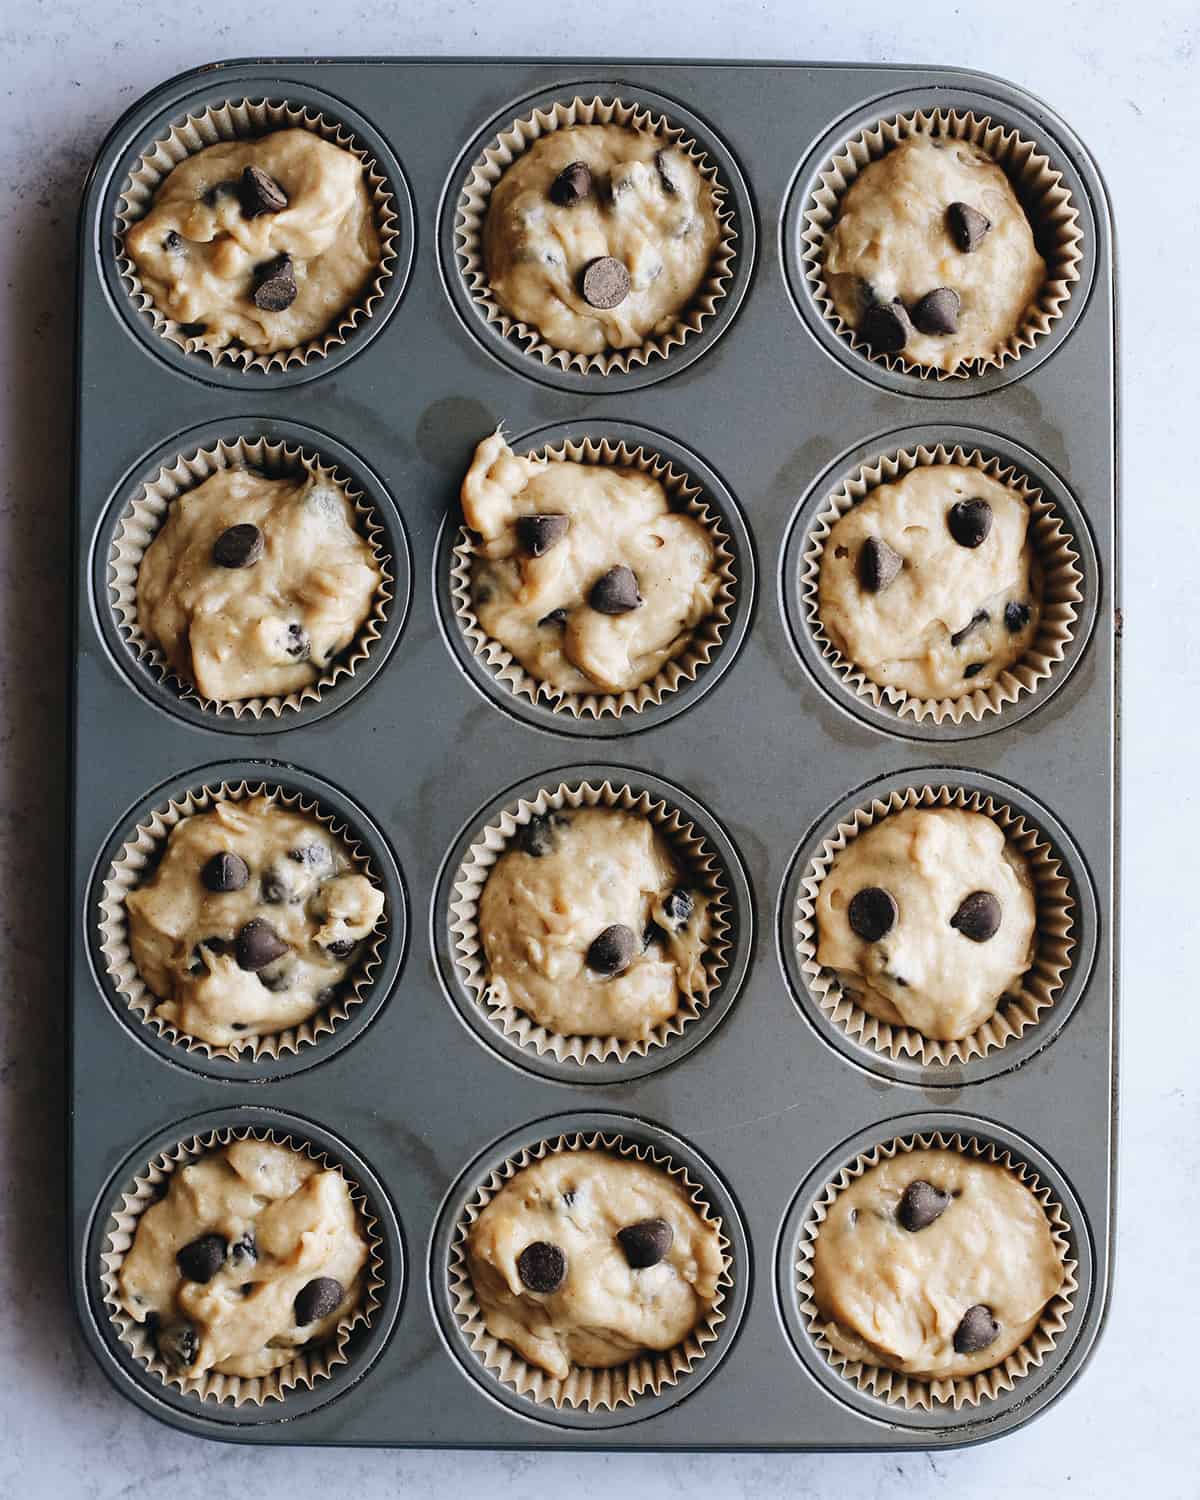 banana chocolate chip muffins in a muffin tin before baking